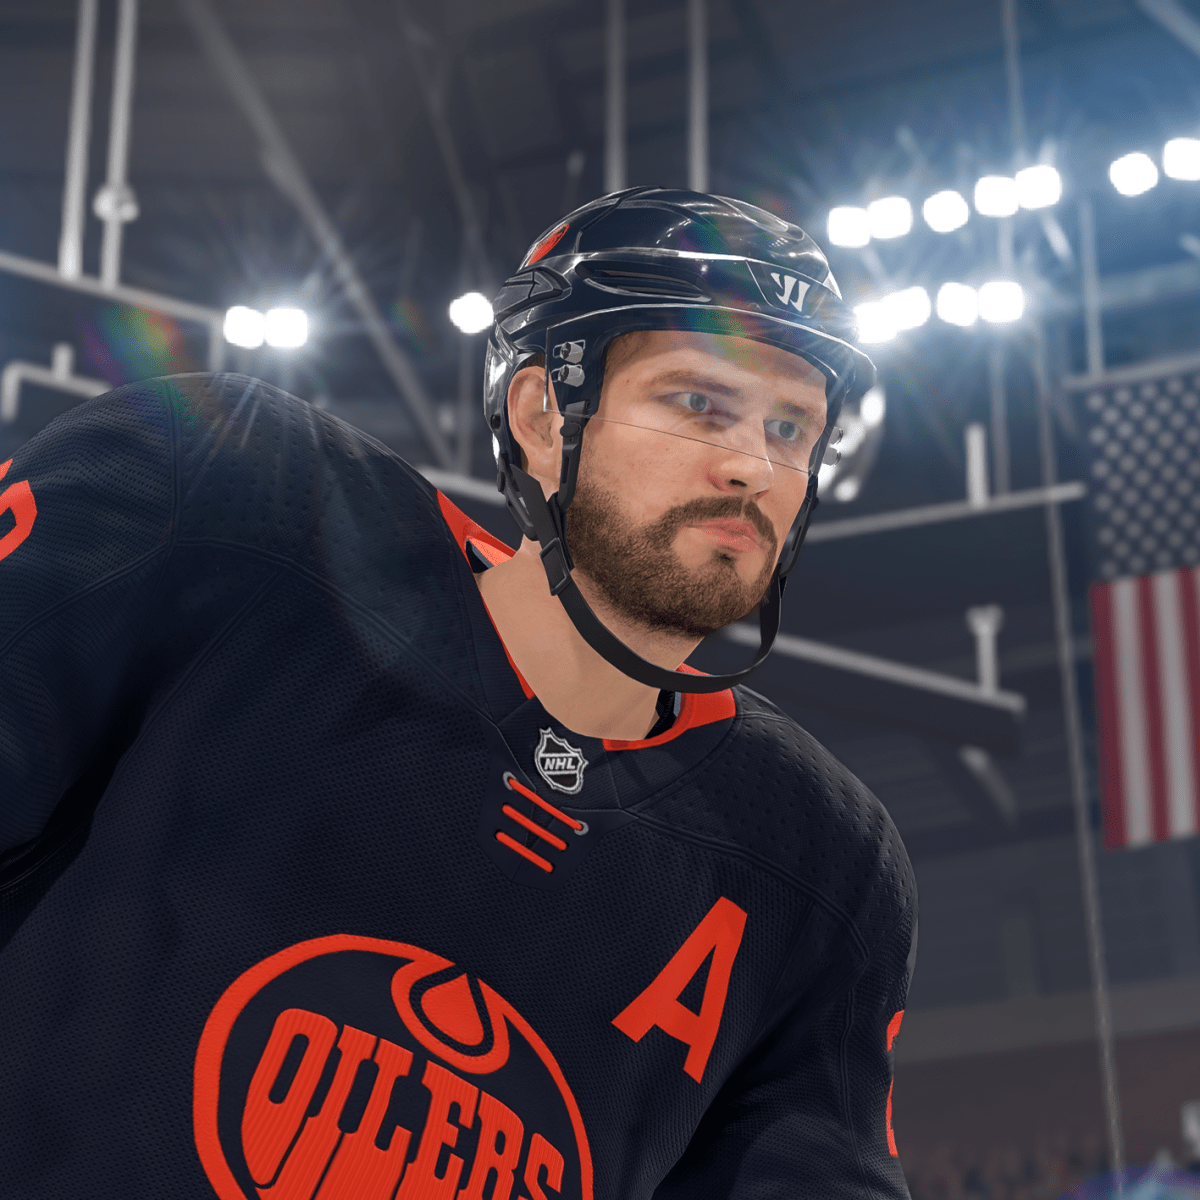 NHL 21 Patch Notes Released For Today's Update, And It's A Big One -  GameSpot